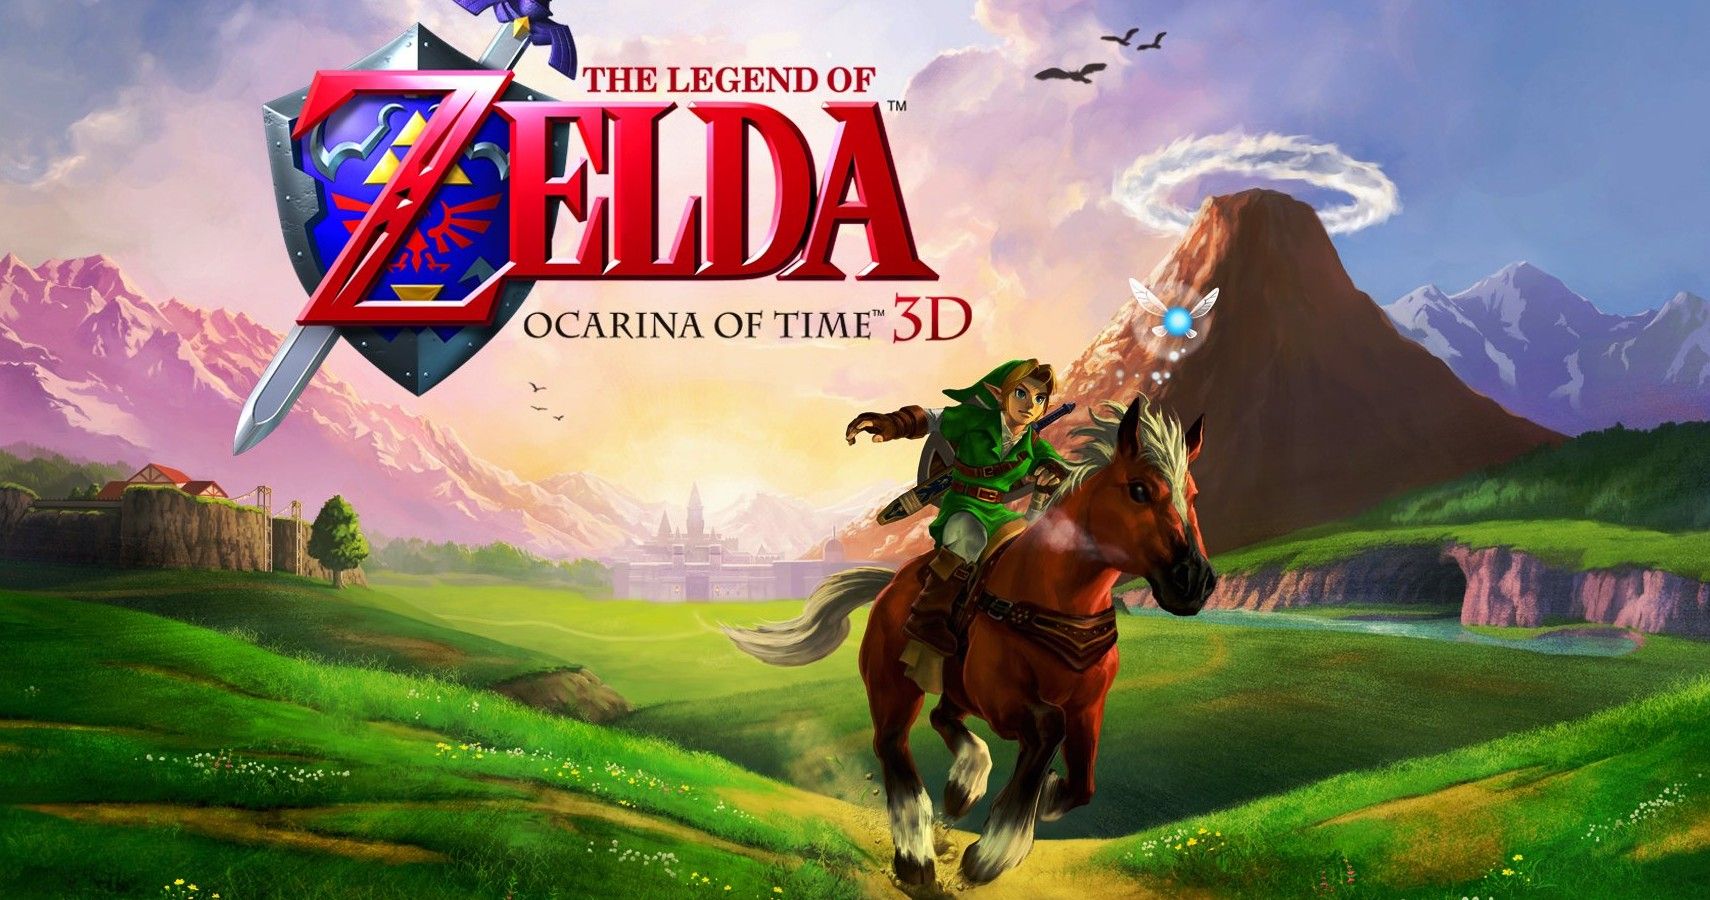 is ocarina of time on the switch